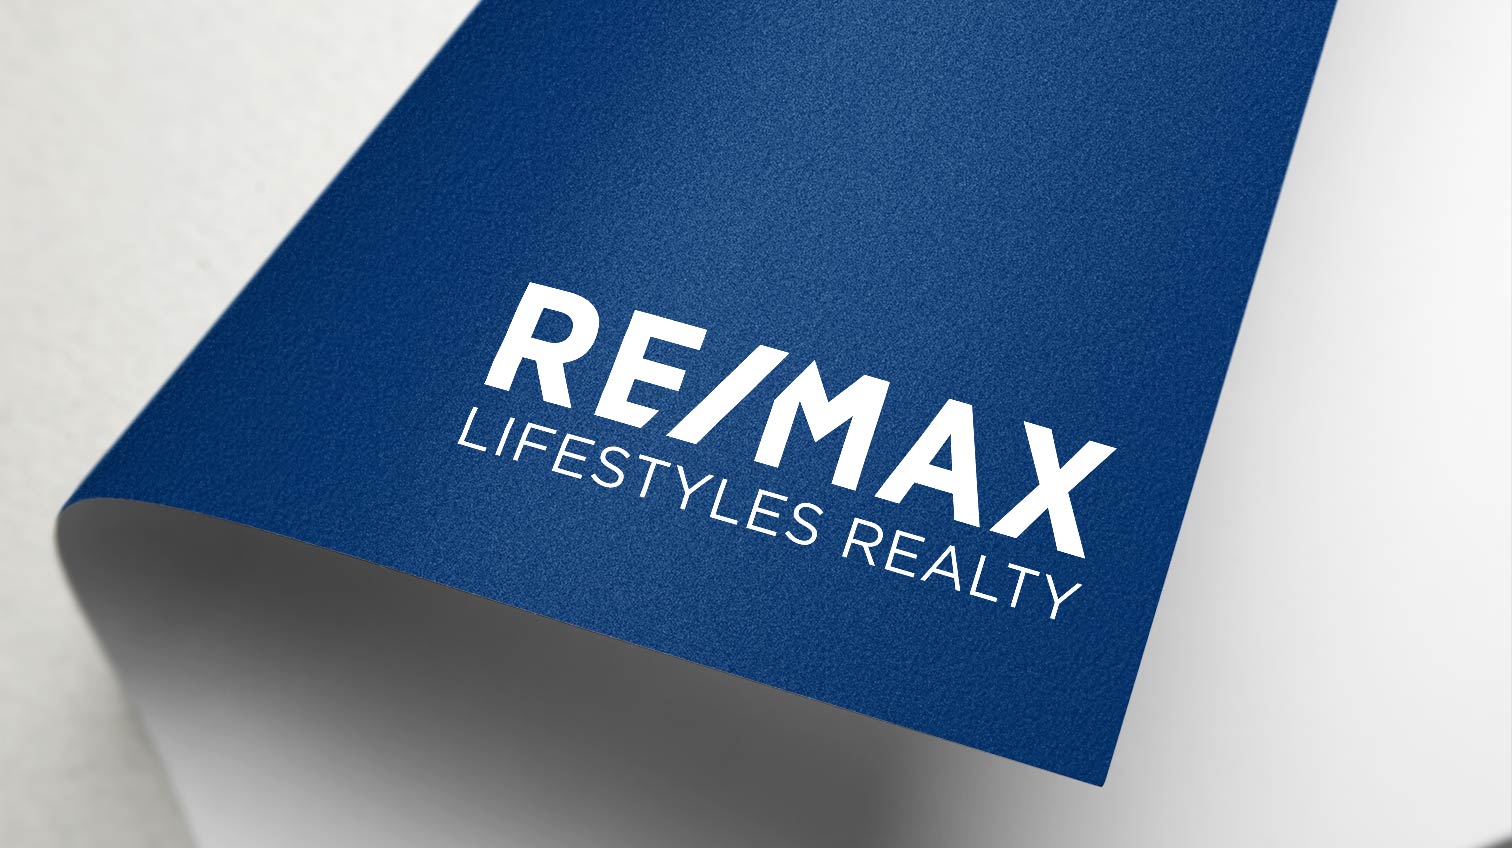 Re/max lifestyle realty logo on a piece of dark blue paper - White Canvas Design